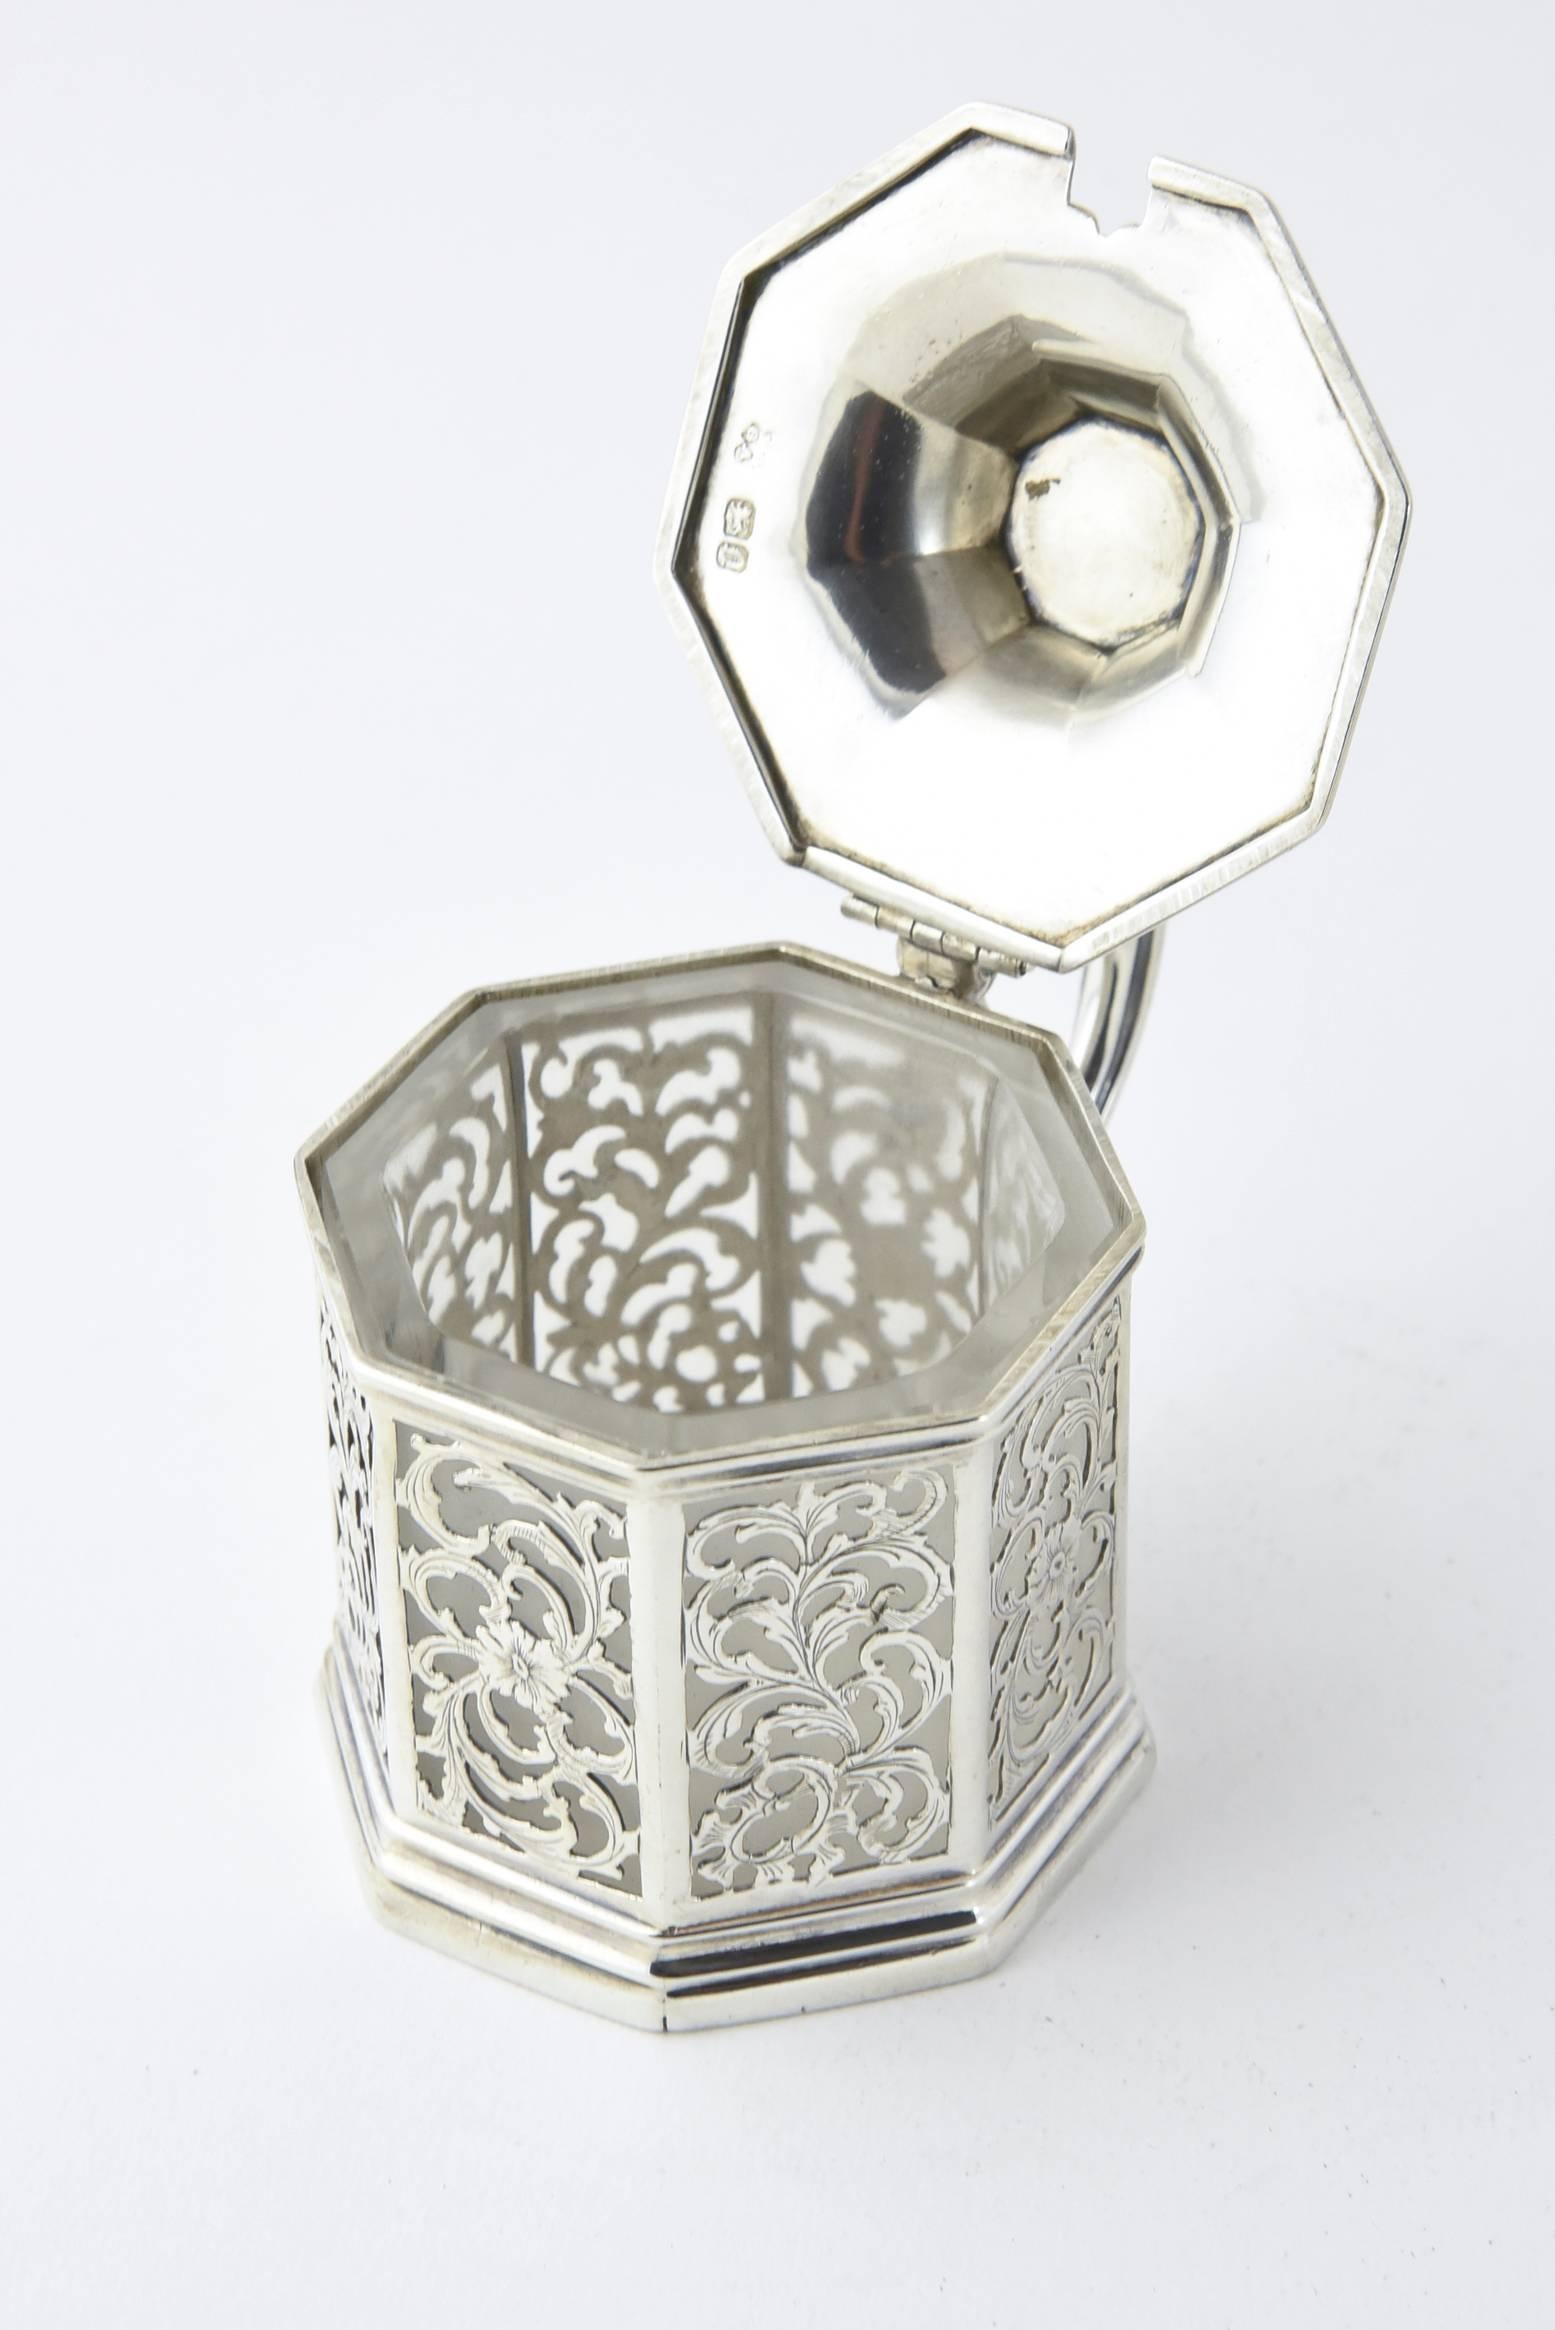 Metalwork Early Victorian Pierced Sterling Mustard Pot by John Angell and George Angell For Sale